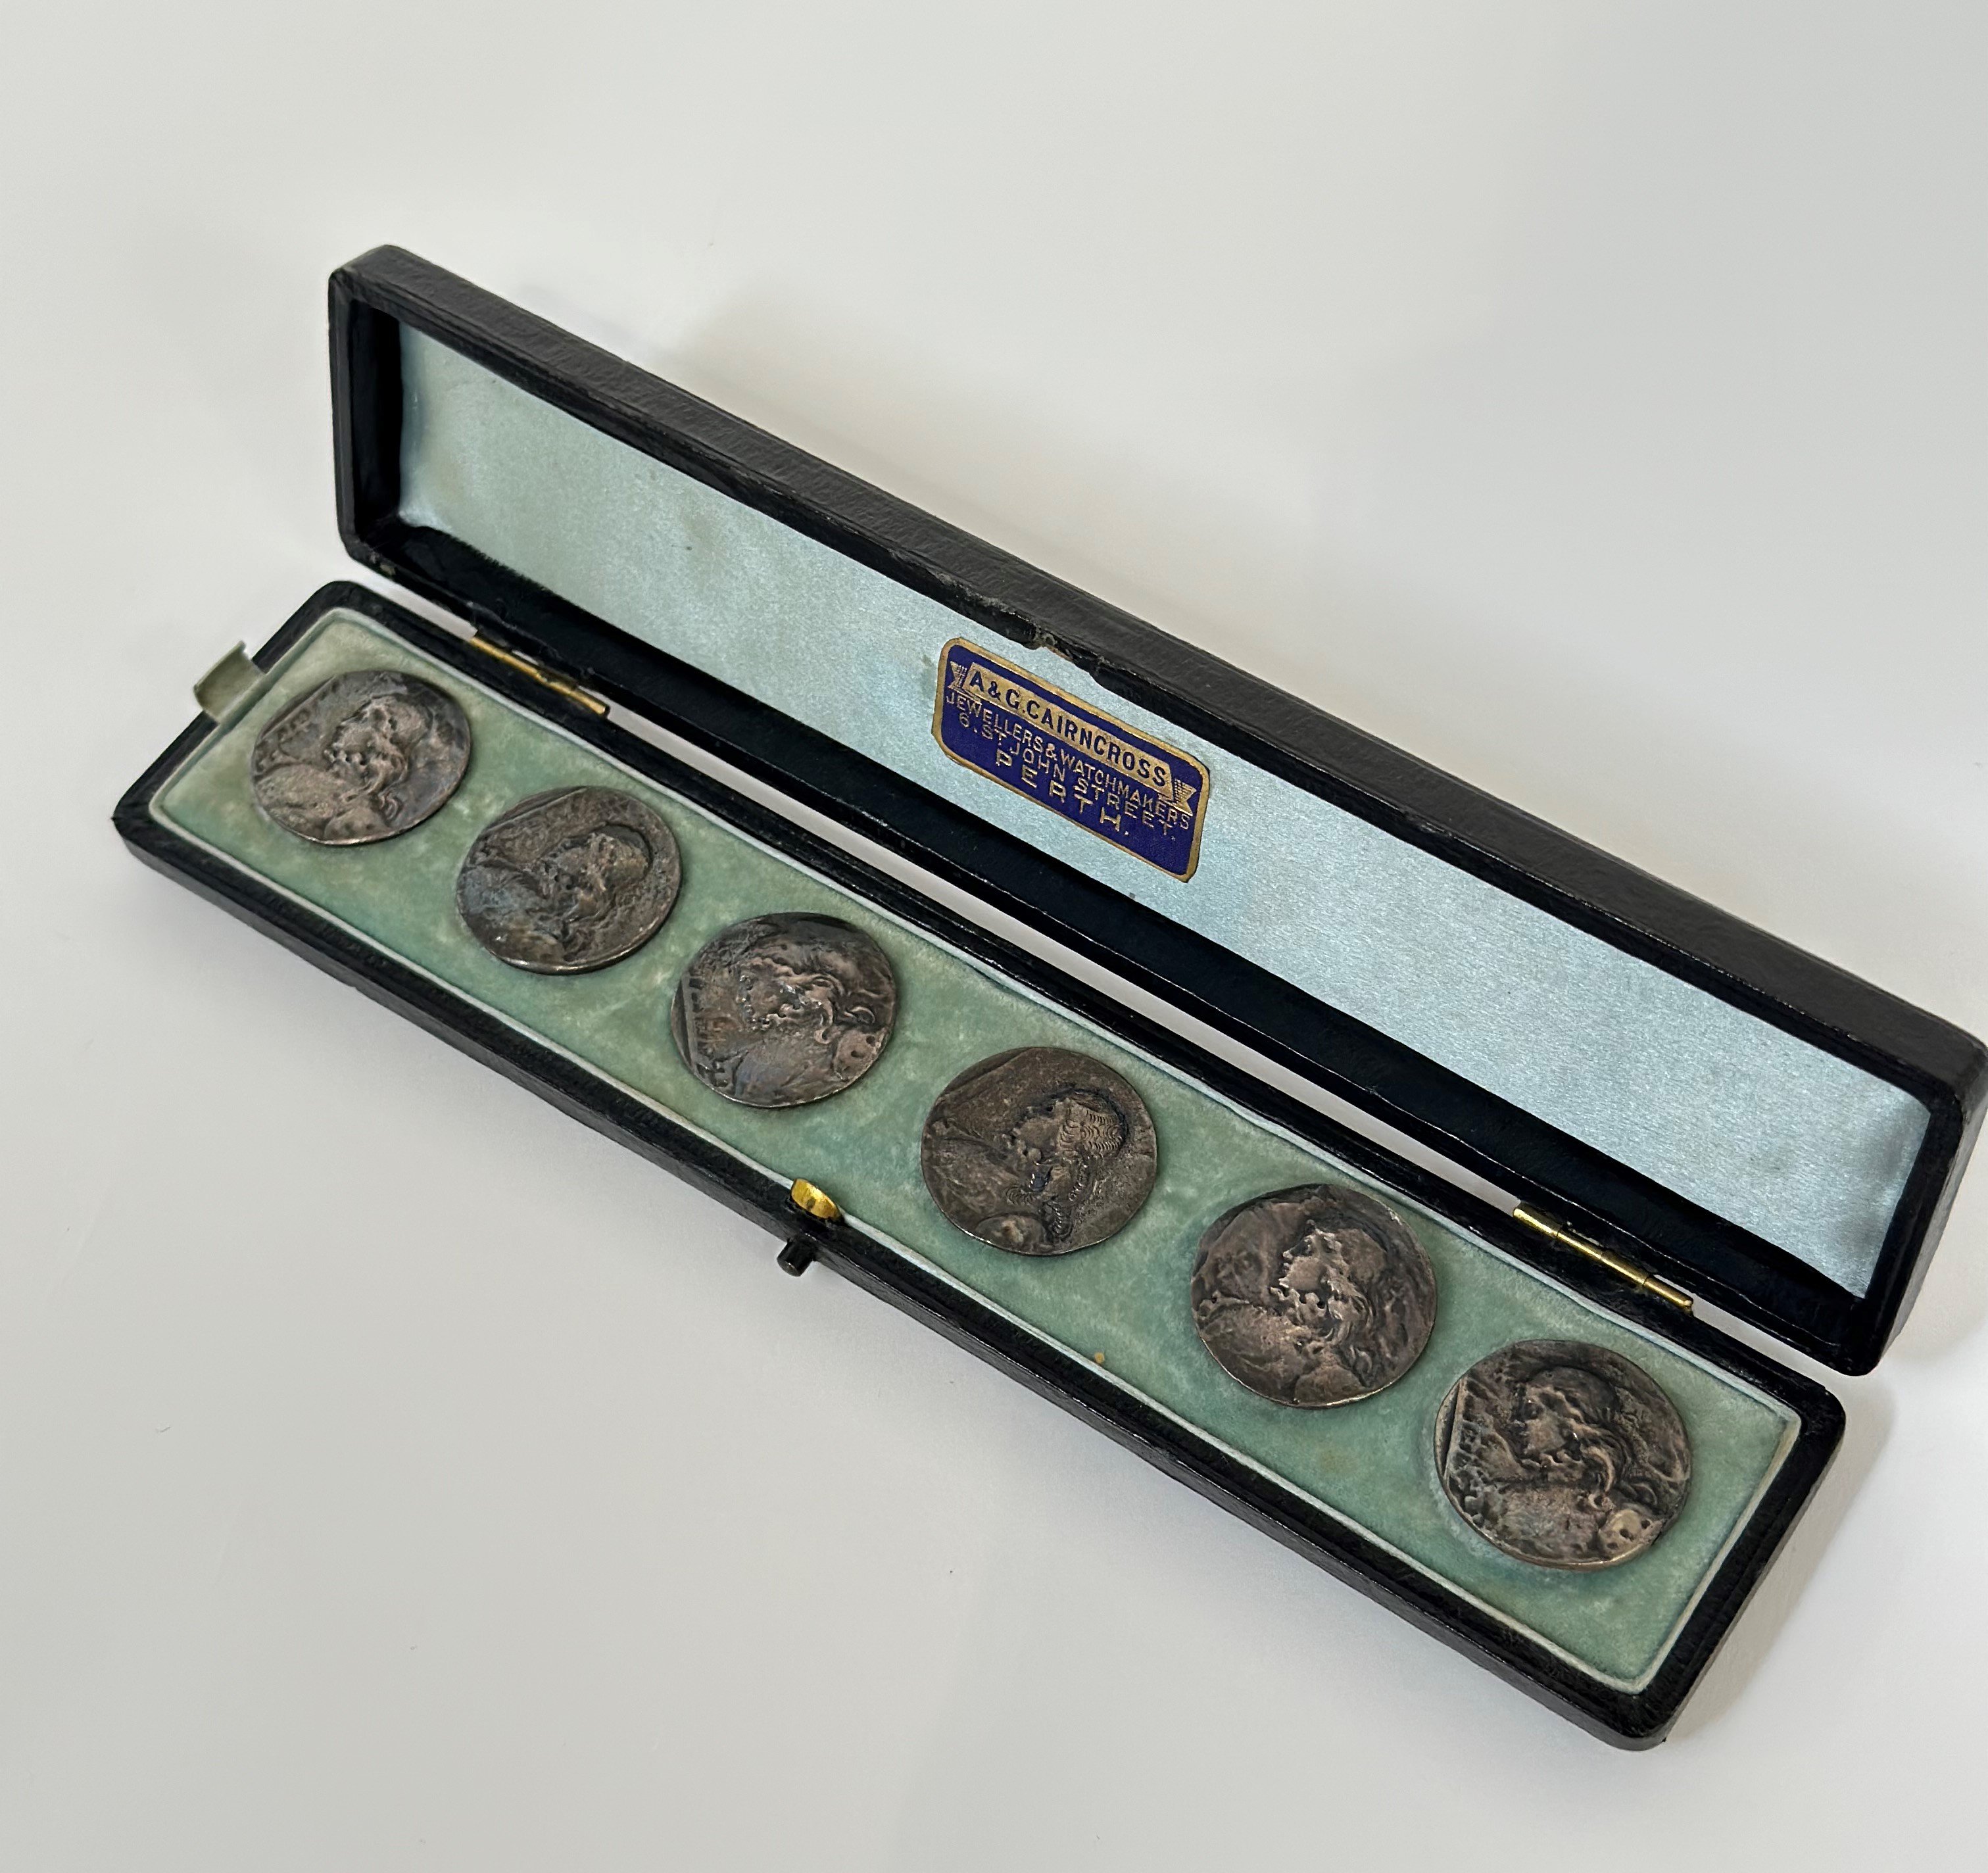 A cased set of six Edwardian silver buttons, Nathan & Hayes, Chester, 1901, in the Art Nouveau